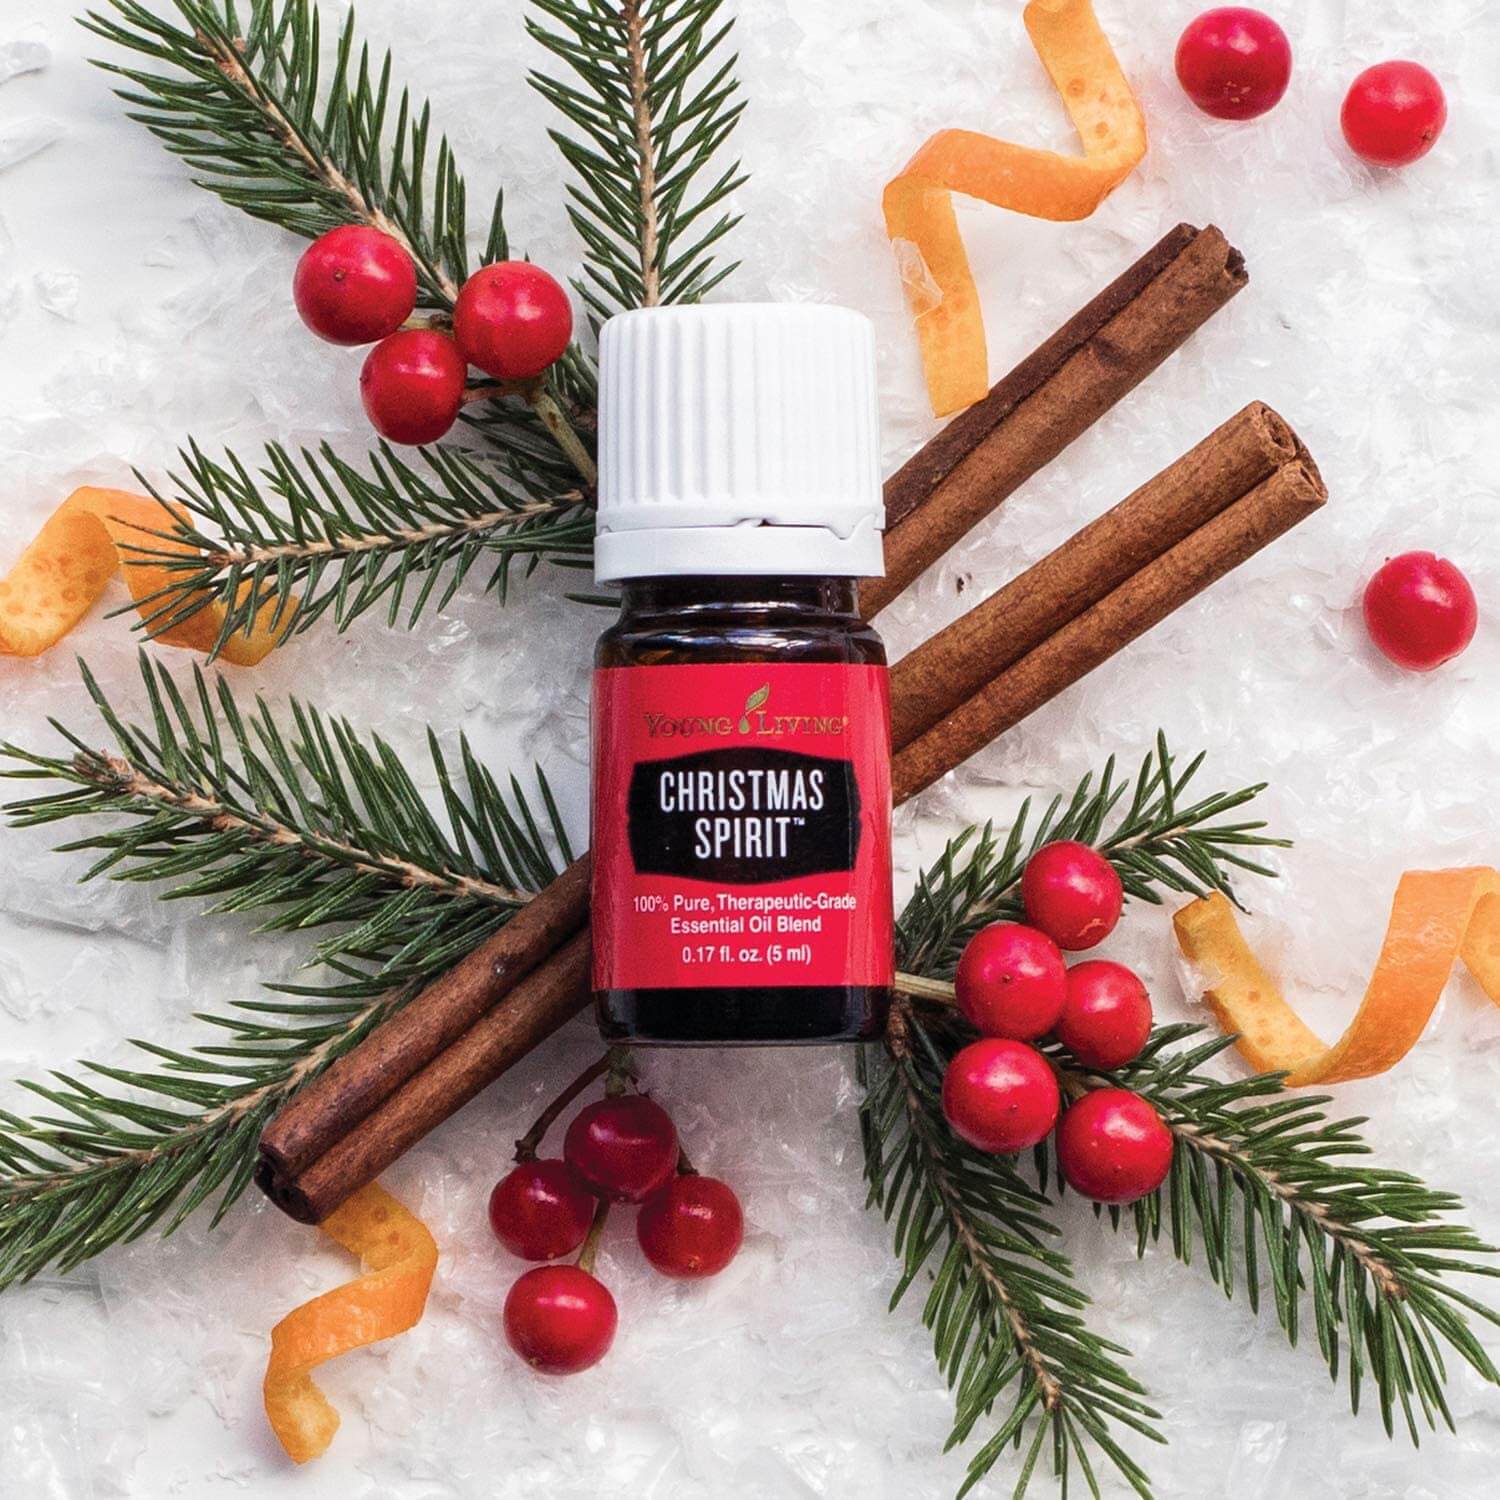 Christmas Spirit Oil Blend Ingredients by Young Living